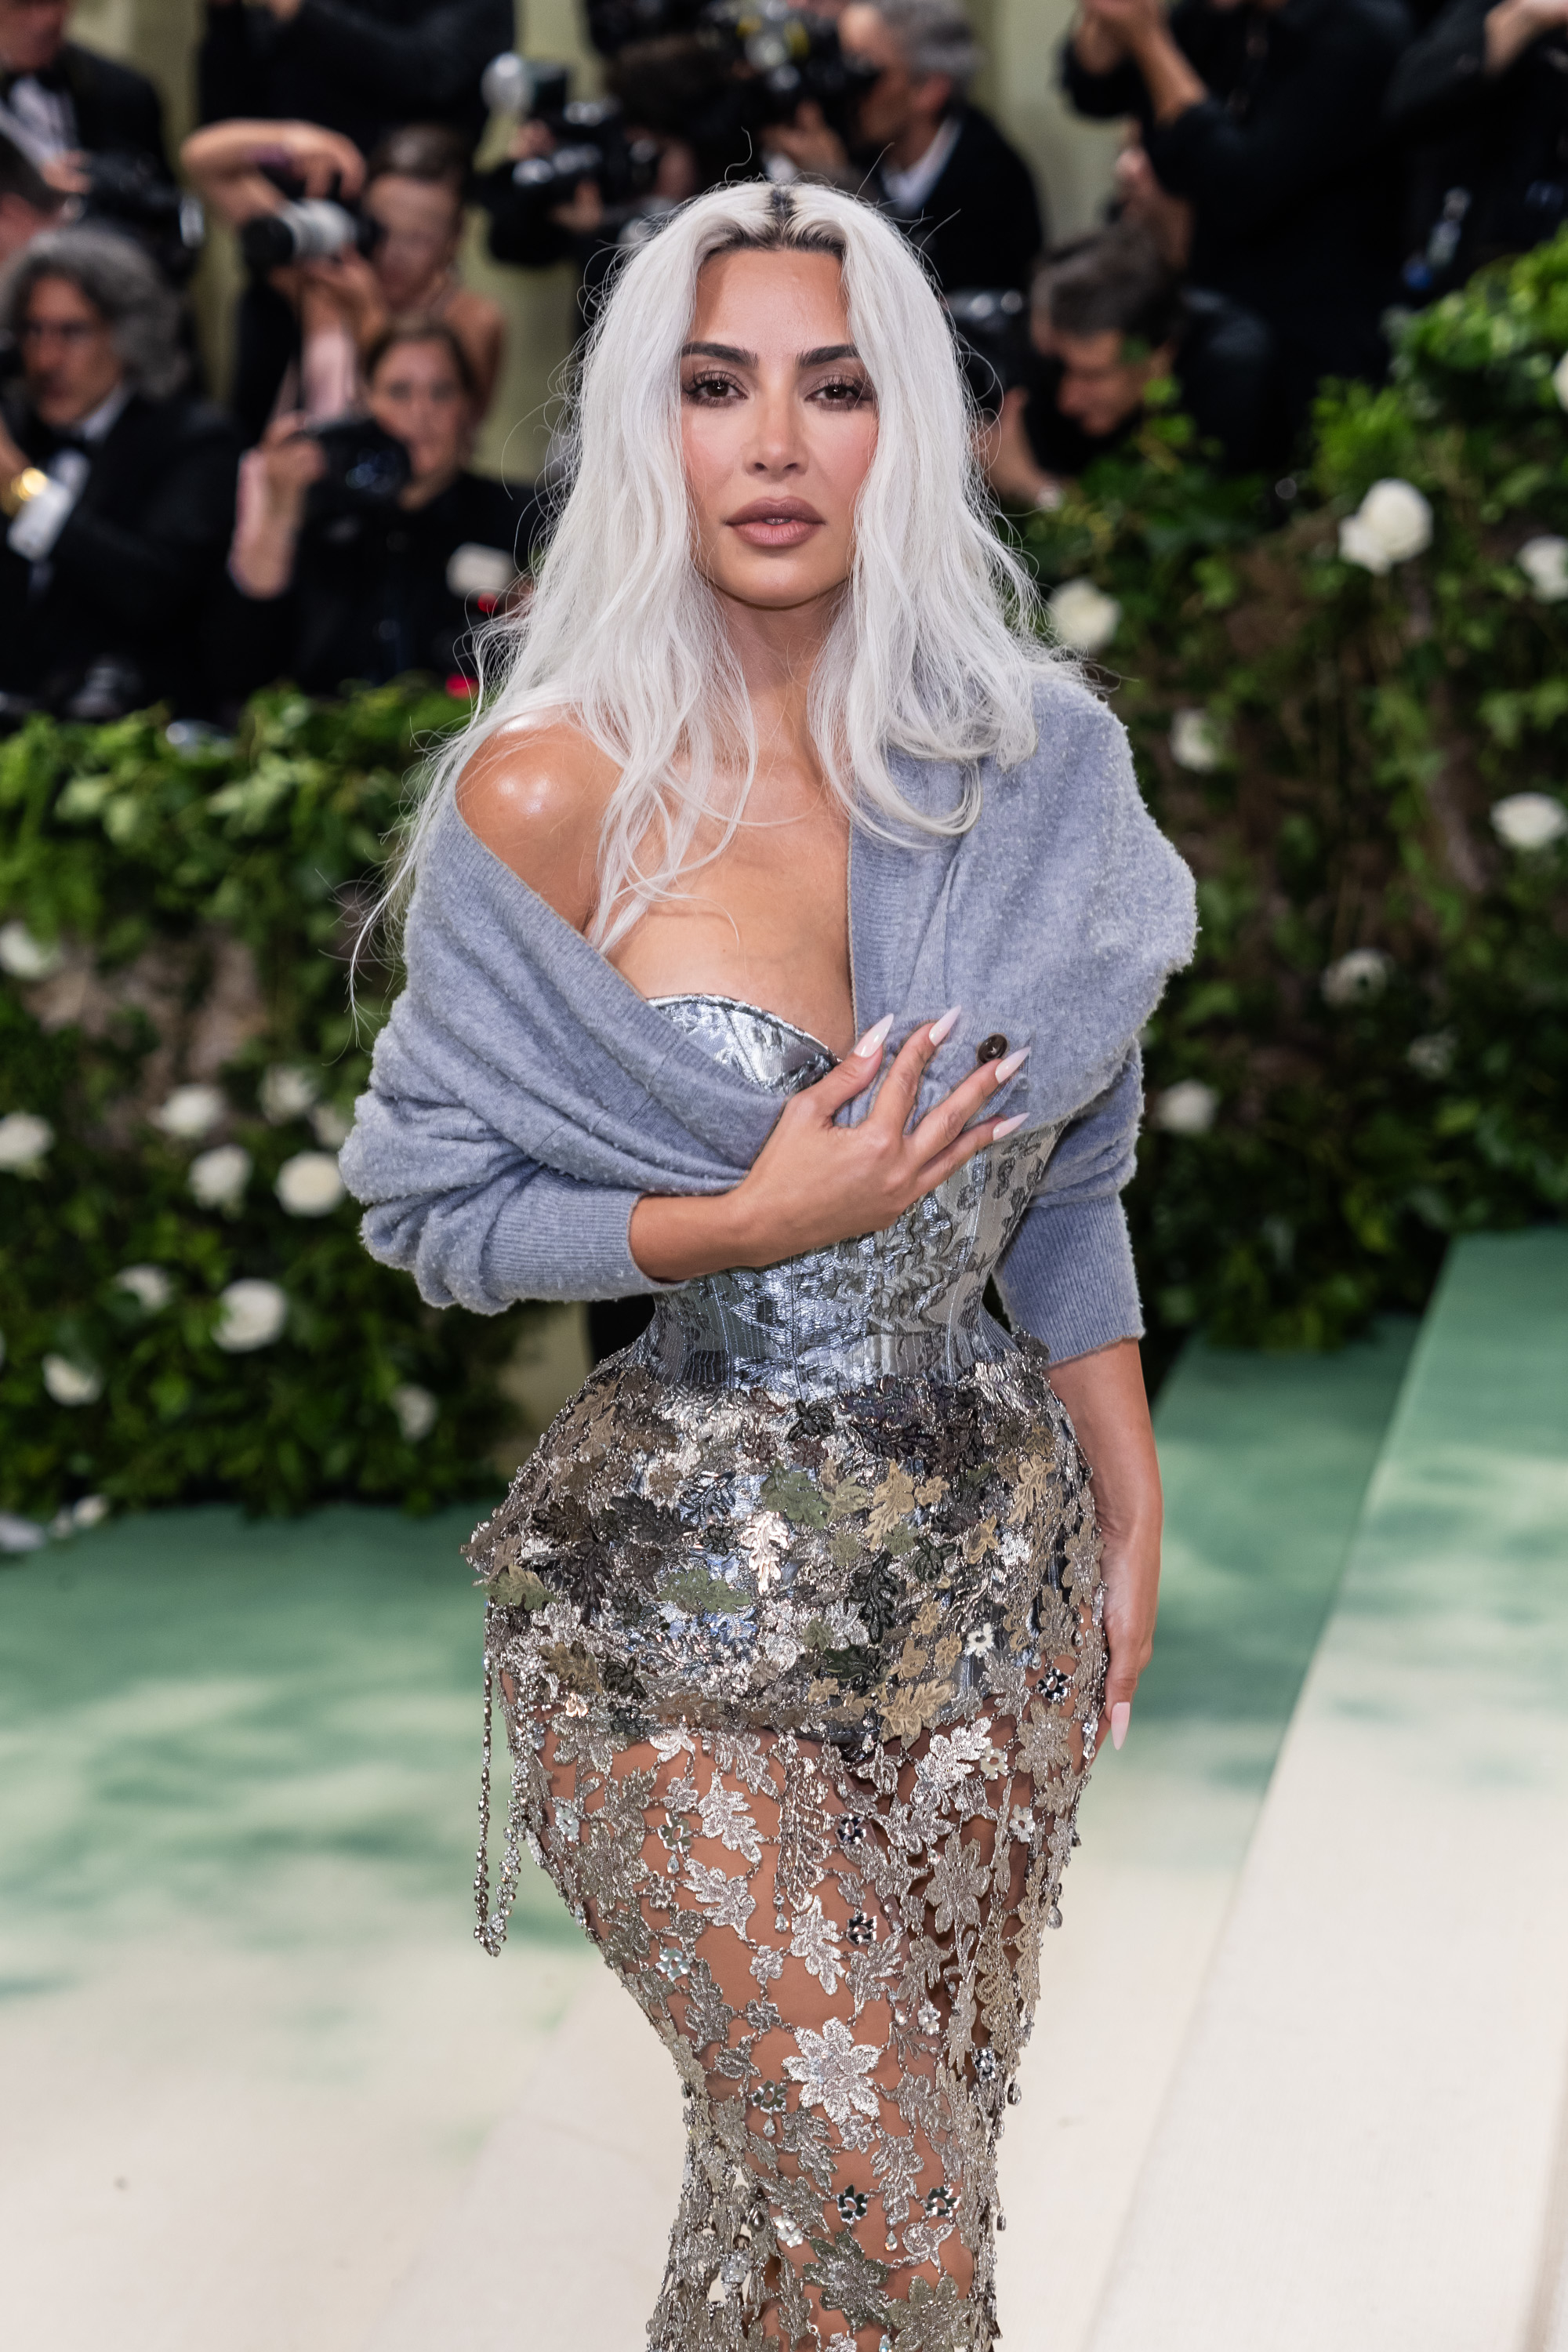 Kim Kardashian in a sparkling, form-fitting metallic dress with floral details and a shawl, posing on a green carpet at an event